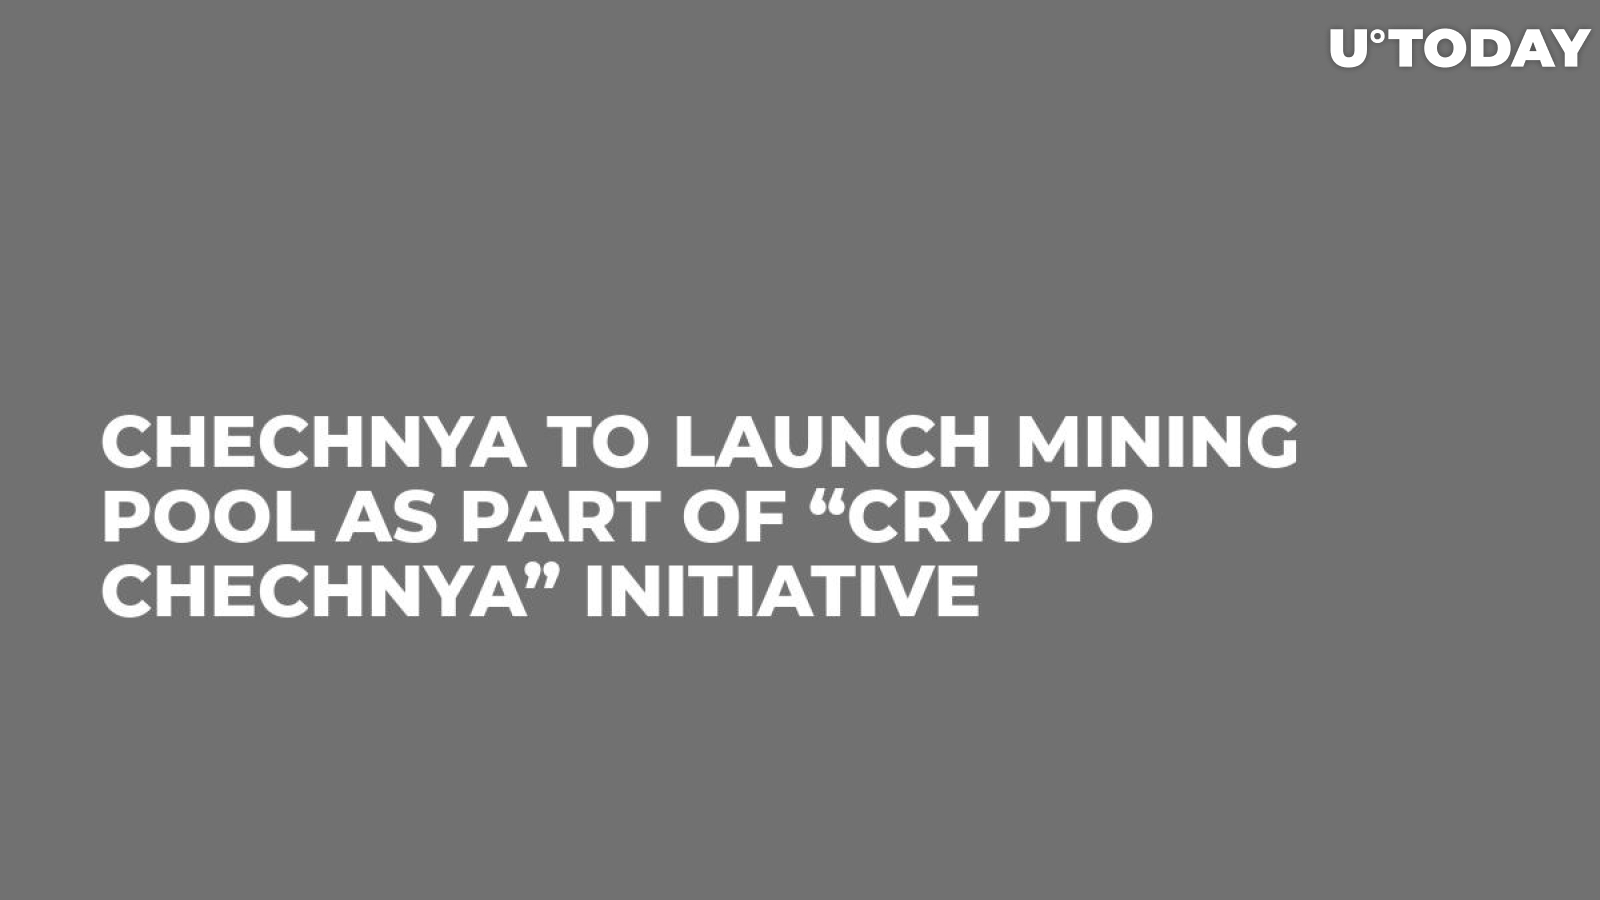 Chechnya to Launch Mining Pool as Part of “Crypto Chechnya” Initiative